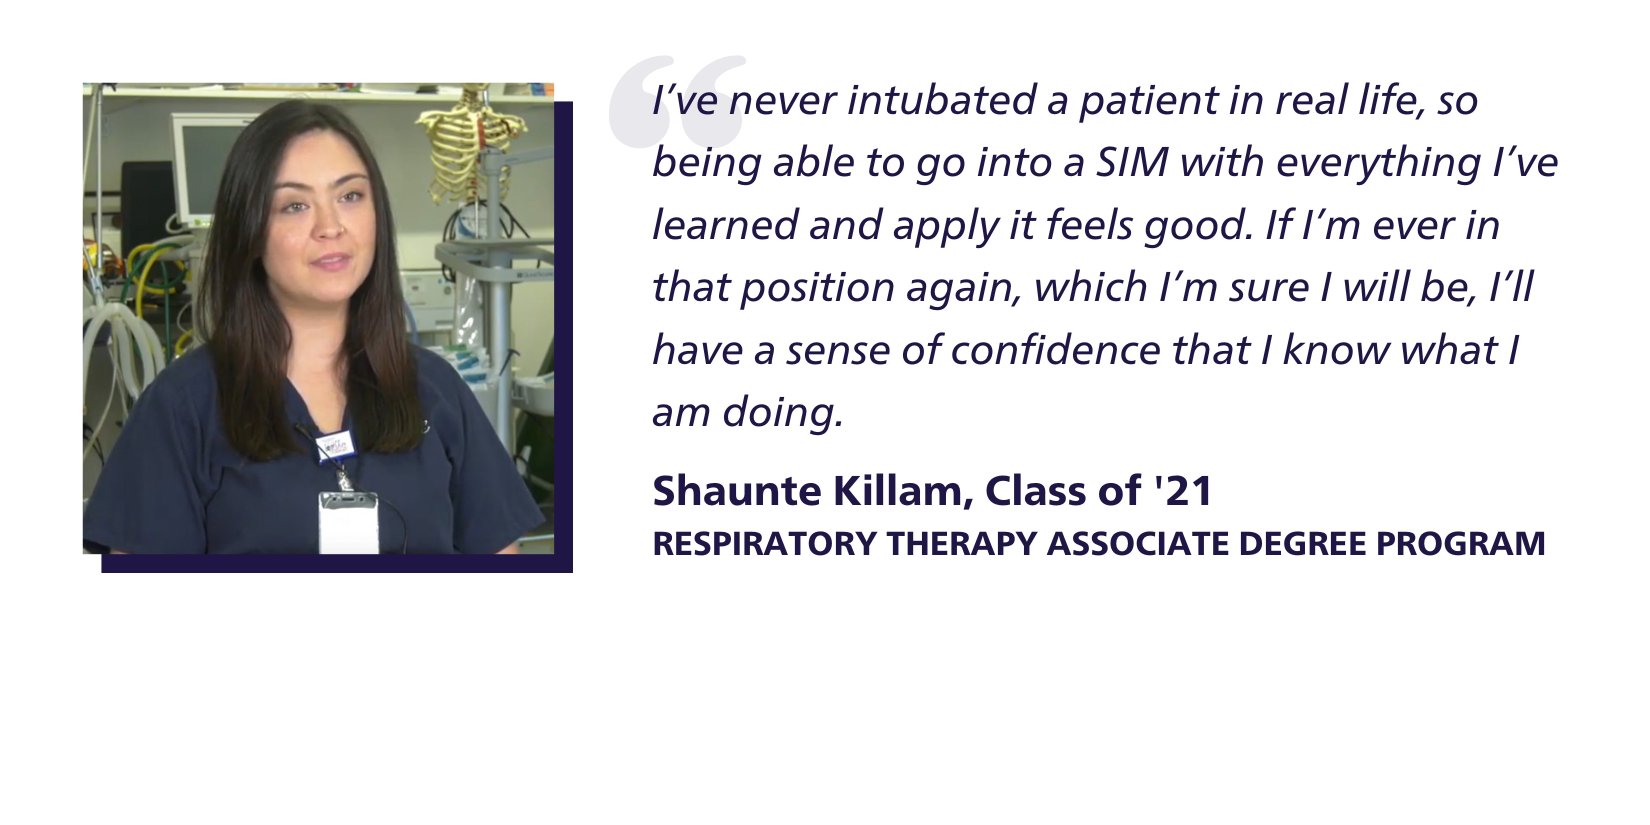 Quote: I’ve never intubated a patient in real life, so being able to go into a SIM with everything I’ve learned and apply it feels good. If I’m ever in that position again, which I’m sure I will be, I’ll have a sense of confidence that I know what I am doing. Shaunte Killam, Class of '21, Respiratory Therapy Associate Degree Program